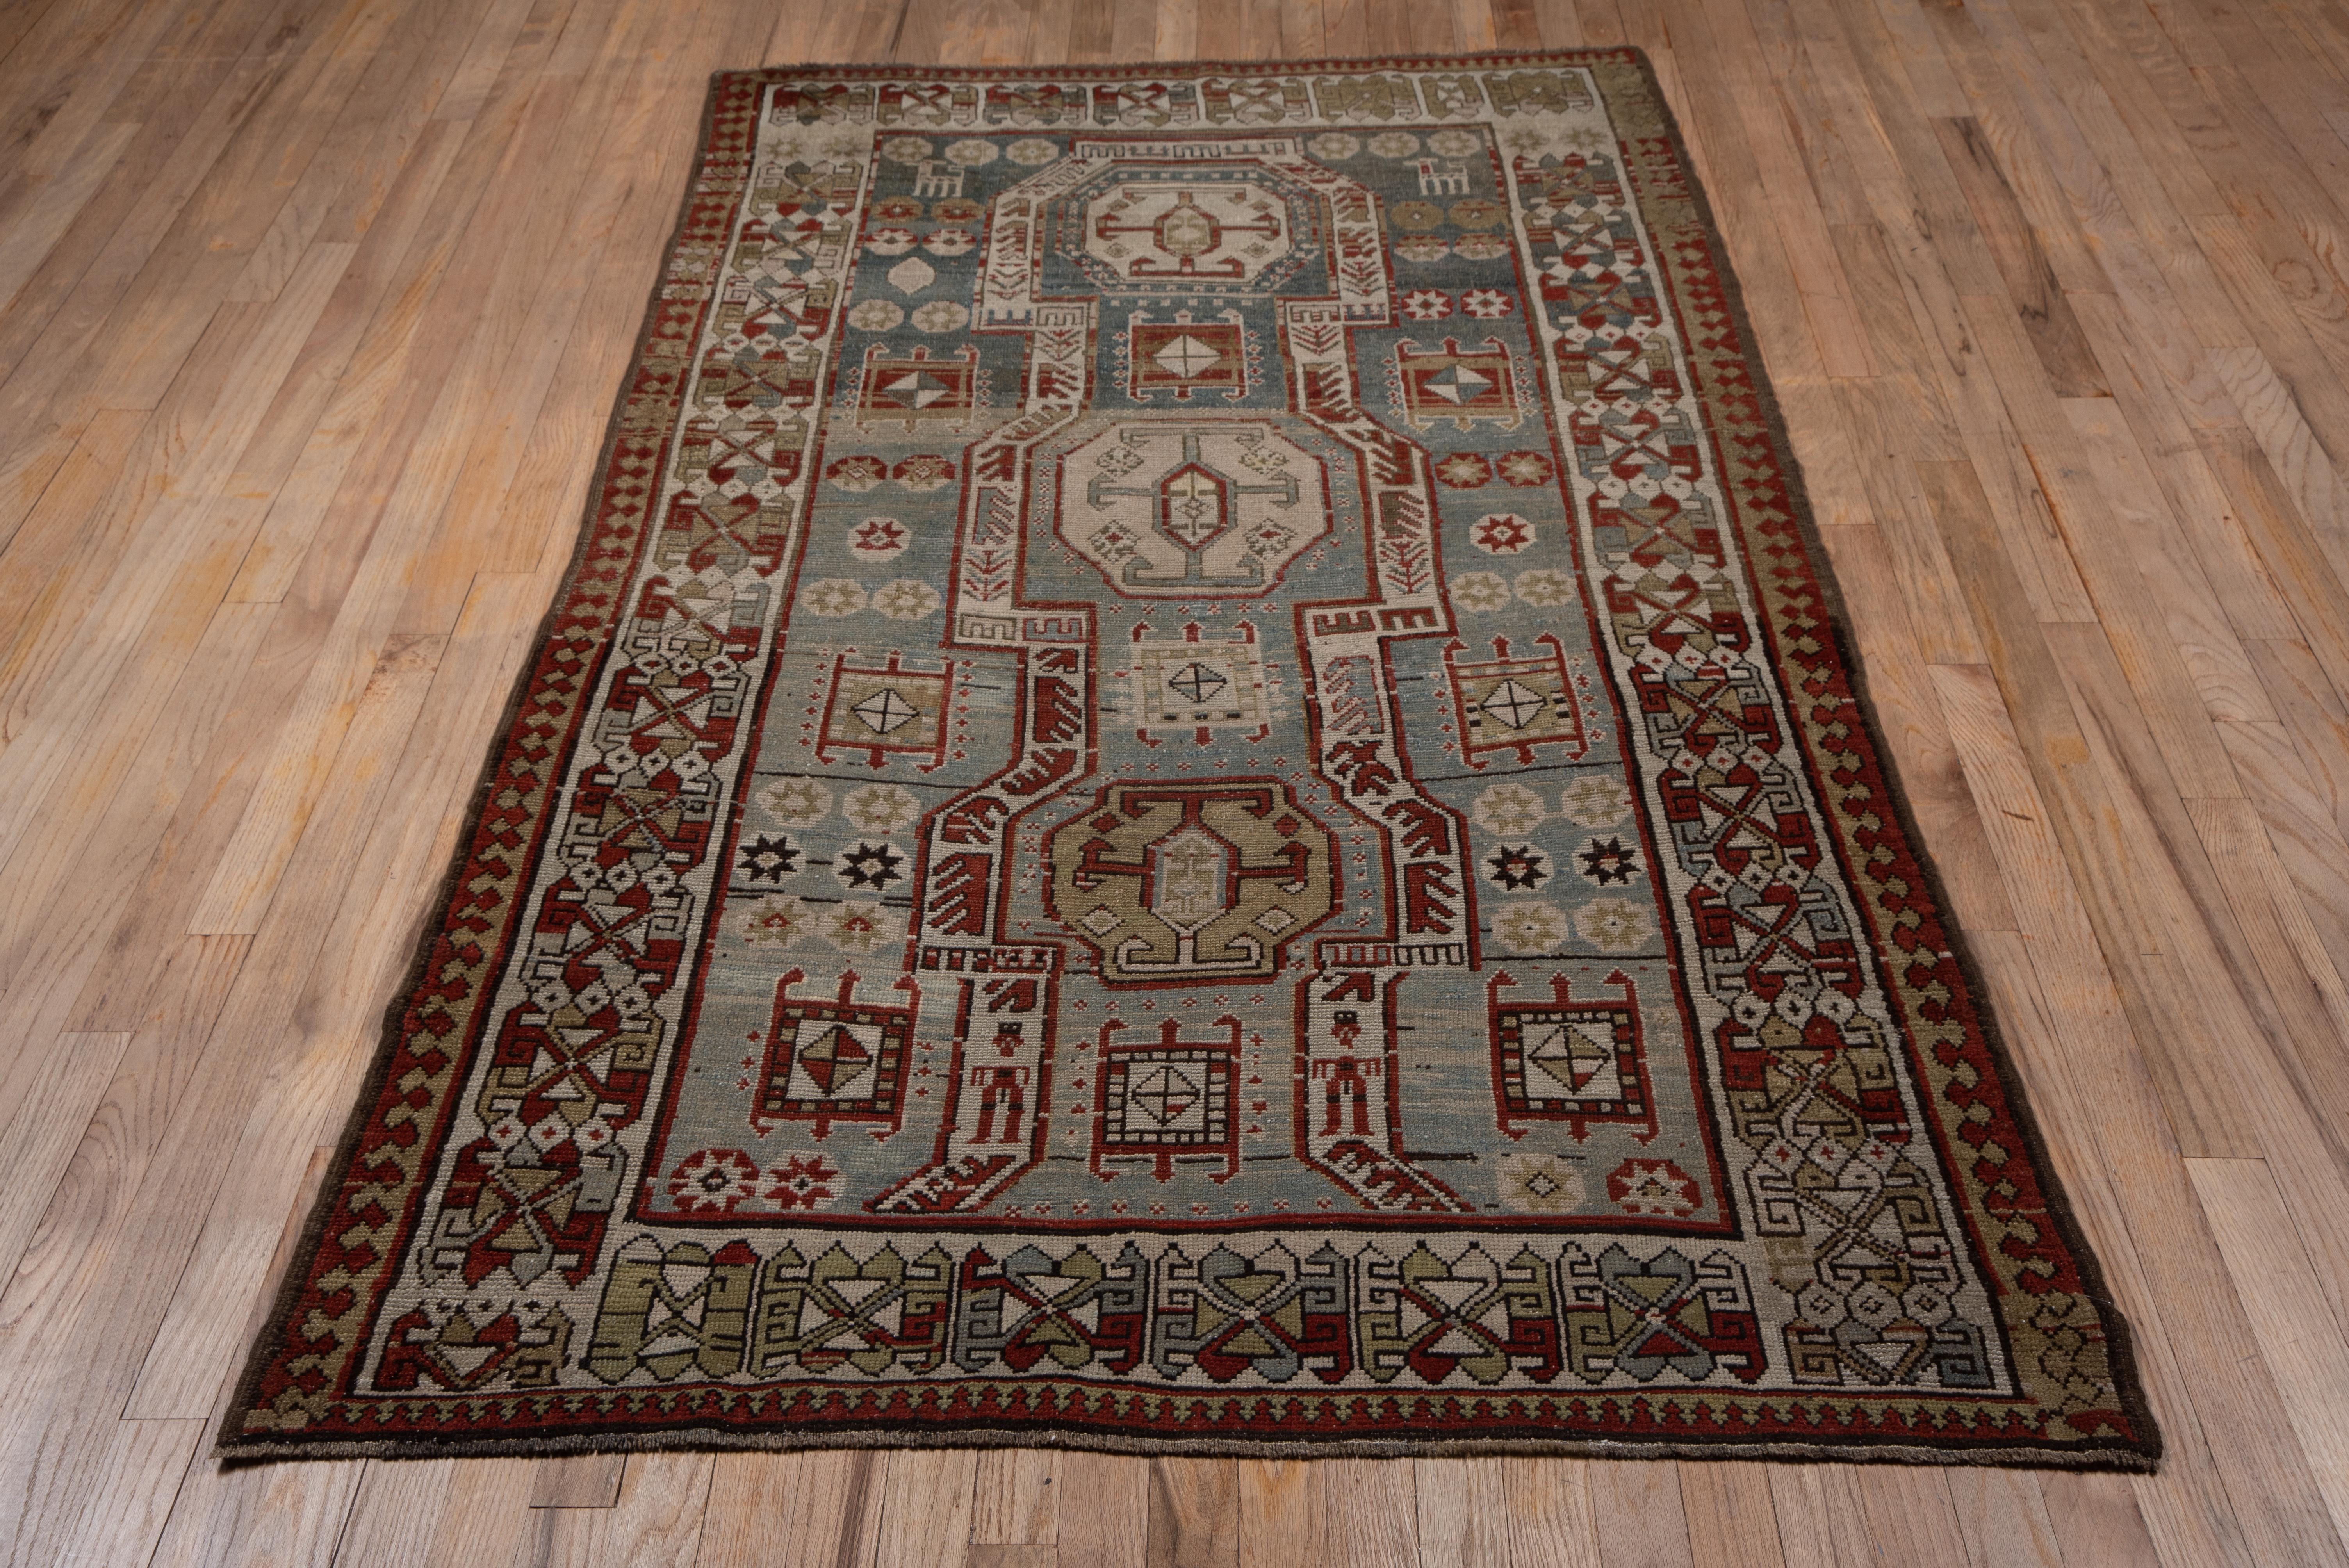 Although coarse like a typical Caucasian Kazak, the design is derived from east Caucasian Shirvan rugs with its elongated head and foot panel enclosing octogons in ivory and straw. The abrashed teal ground is particularly attractive and is adorned